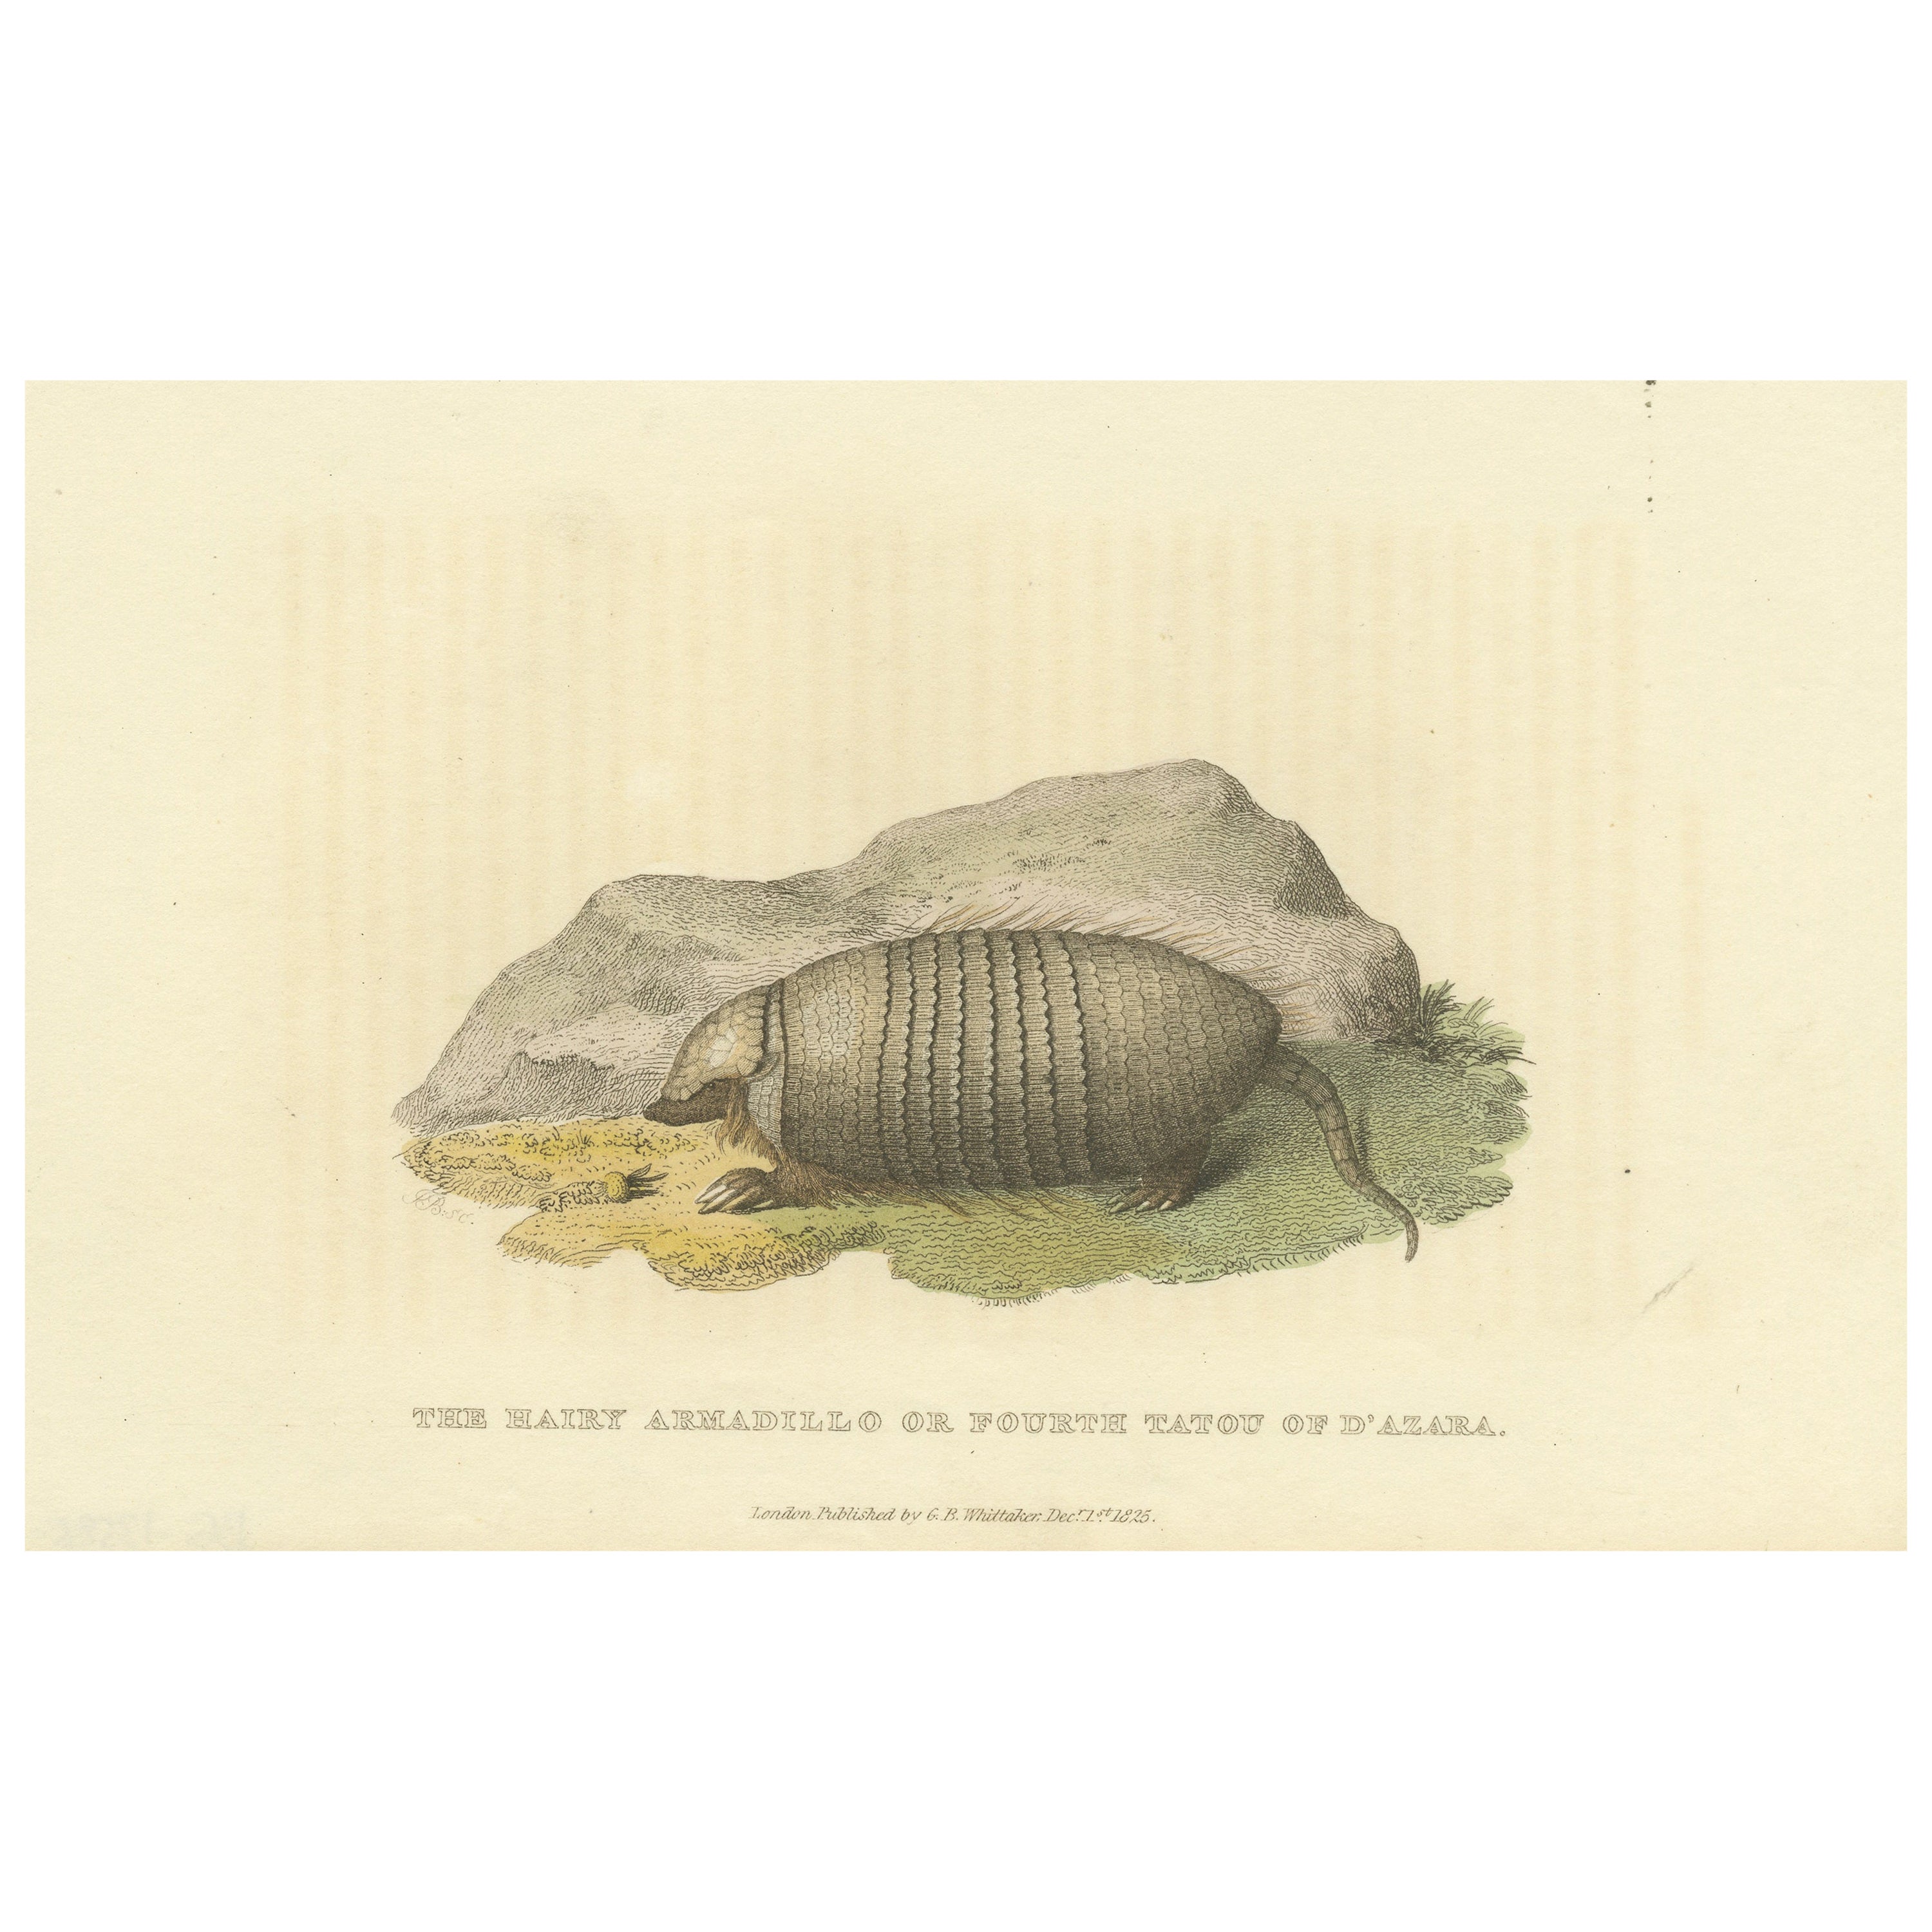 An Original 1825 Illustration of the Large Hairy Armadillo by G.B. Whittaker For Sale